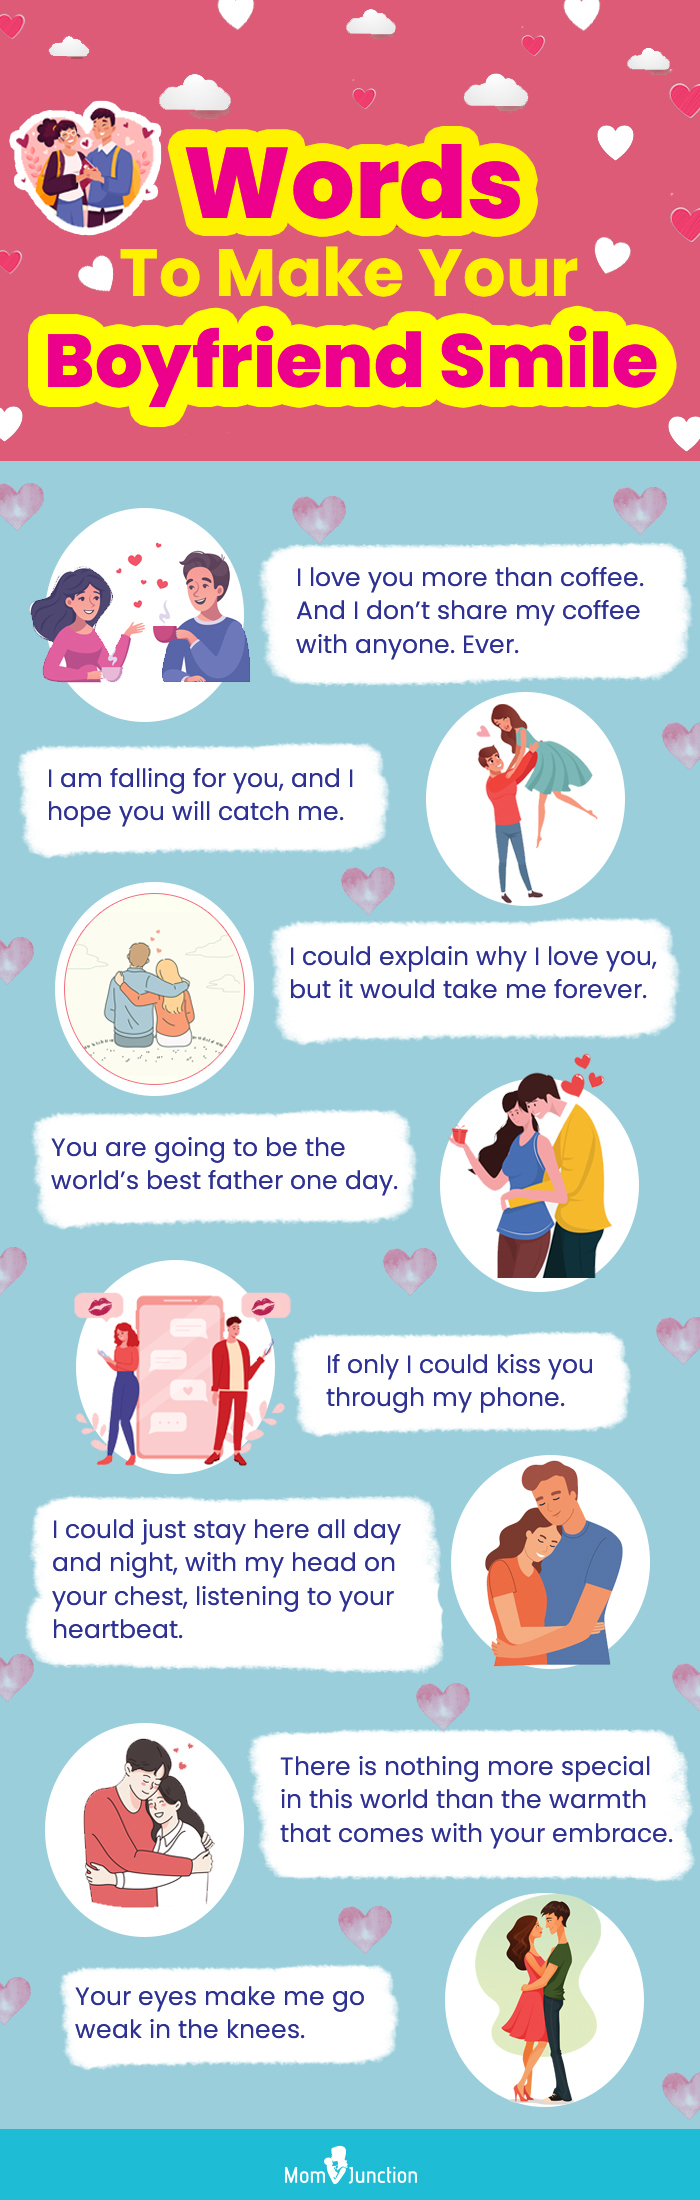 200+ Nice, Funny, And Cute Things To Say To Your Boyfriend